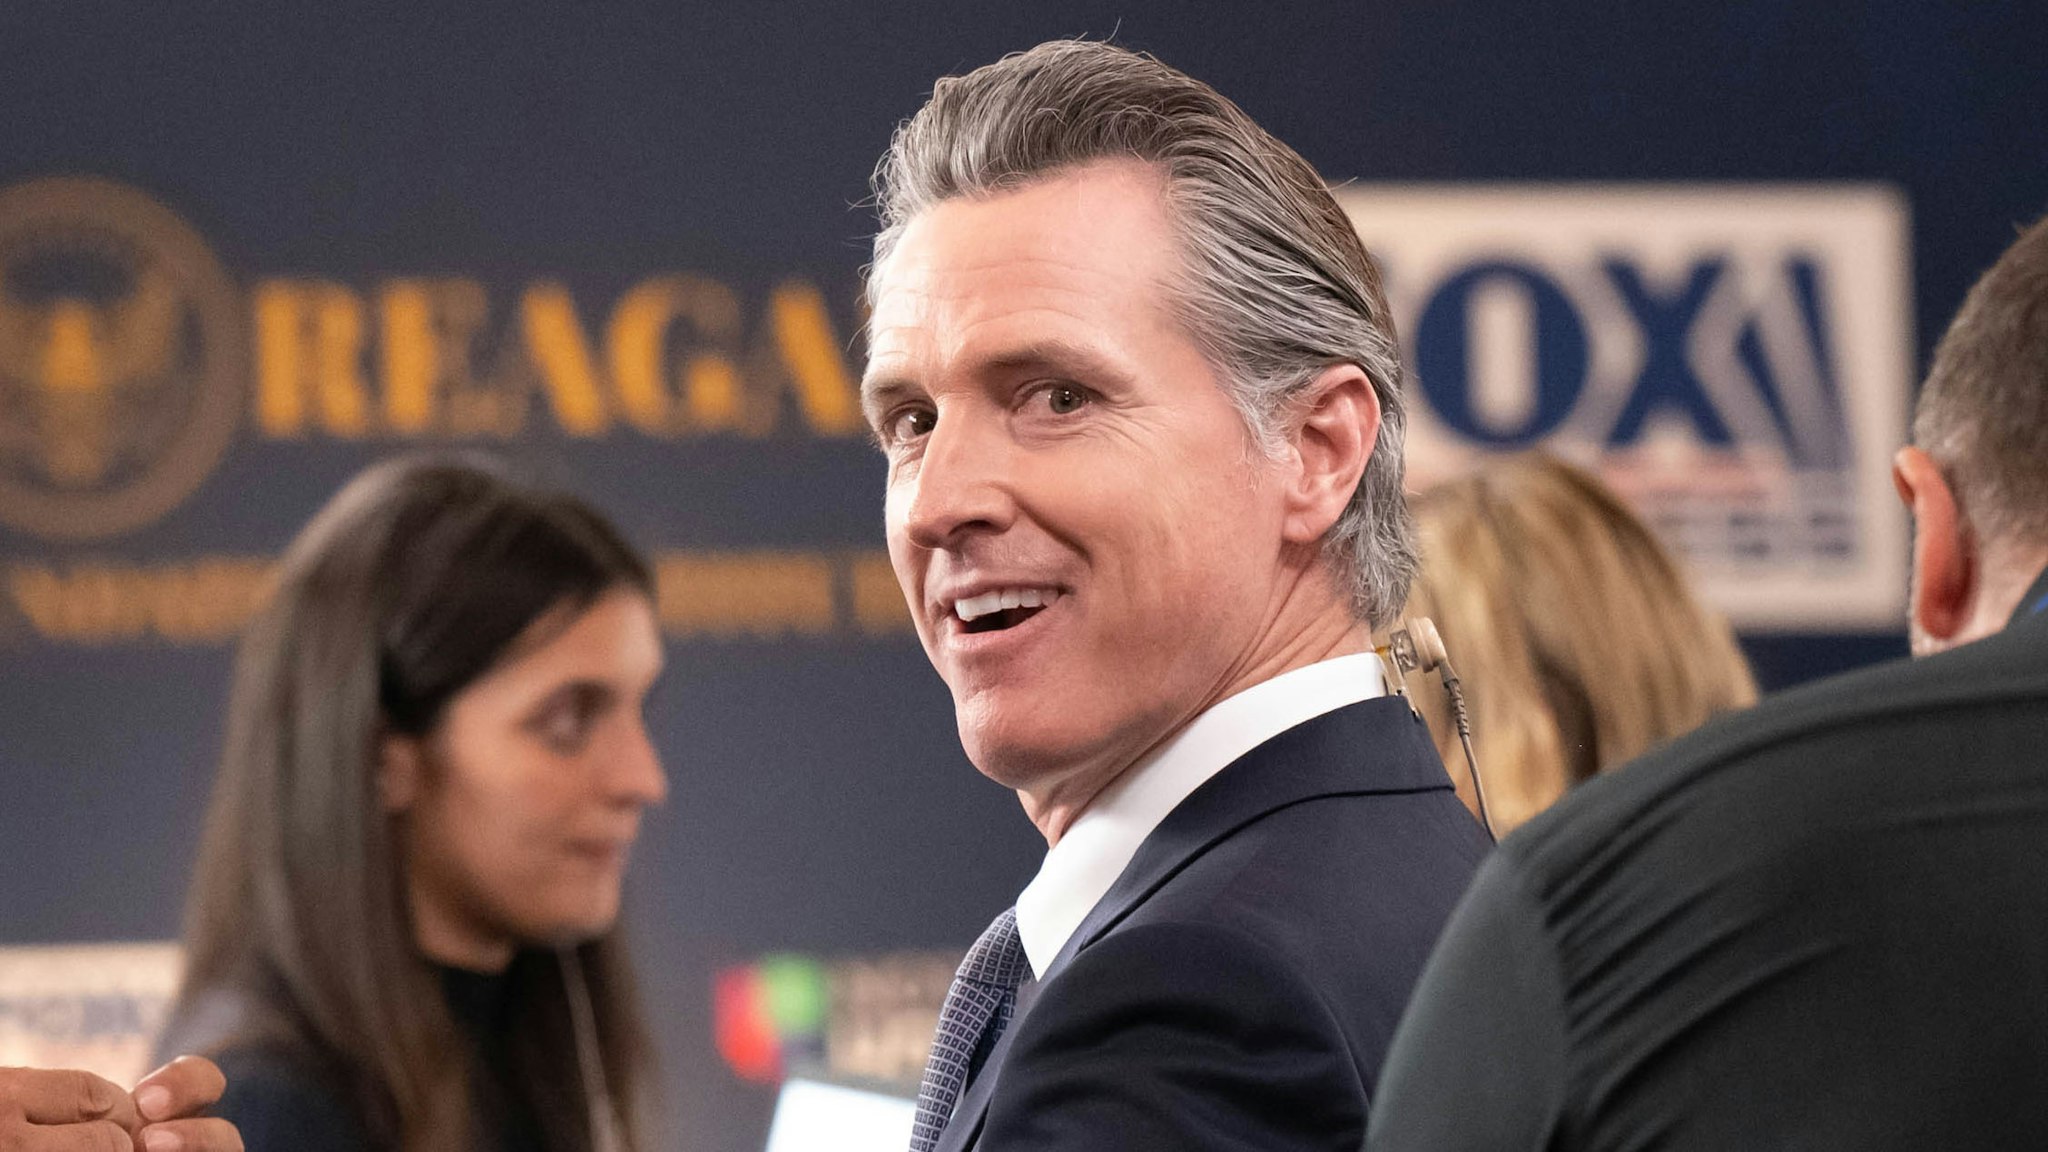 Simi Valley, CA - September 27:Simi Valley, CA - September 27:California Governor Gavin Newsom talks with media in the "Spin Room" before the start of the second GOP debate at the Ronald Reagan Presidential Library in Simi Valley, CA, Wednesday, September 27, 2023.